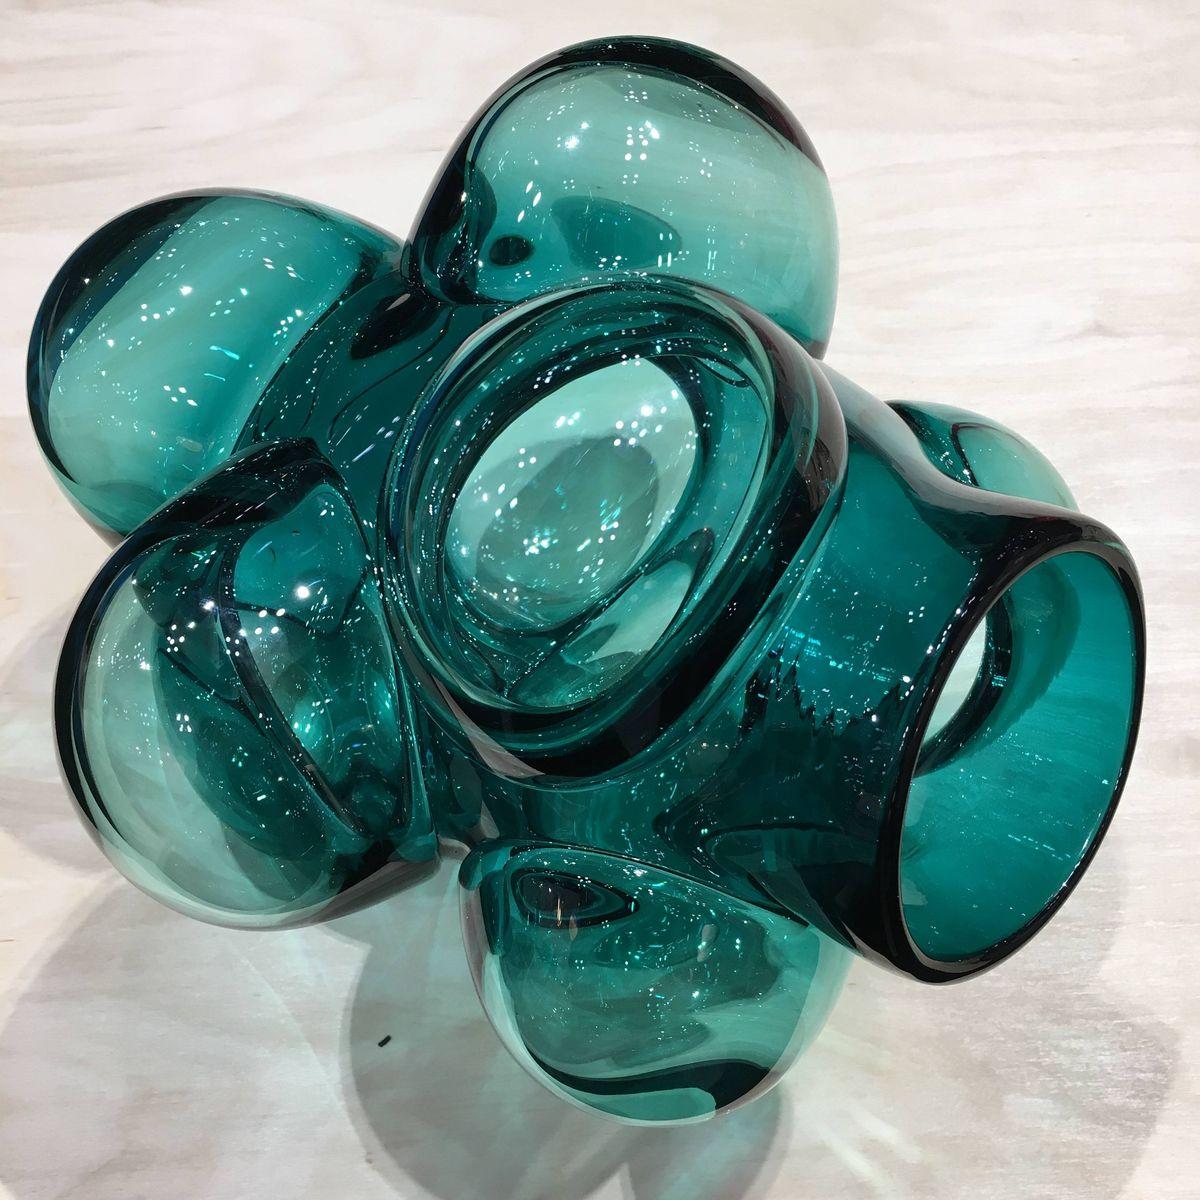 These pieces use dollops of glass over a central core. The hot bits are blown out to diffuse the color and create a bulbous cloud-like shape. The bulbs are arranged so that each vase will sit in a way unique to itself. Hand blown and shaped in lead